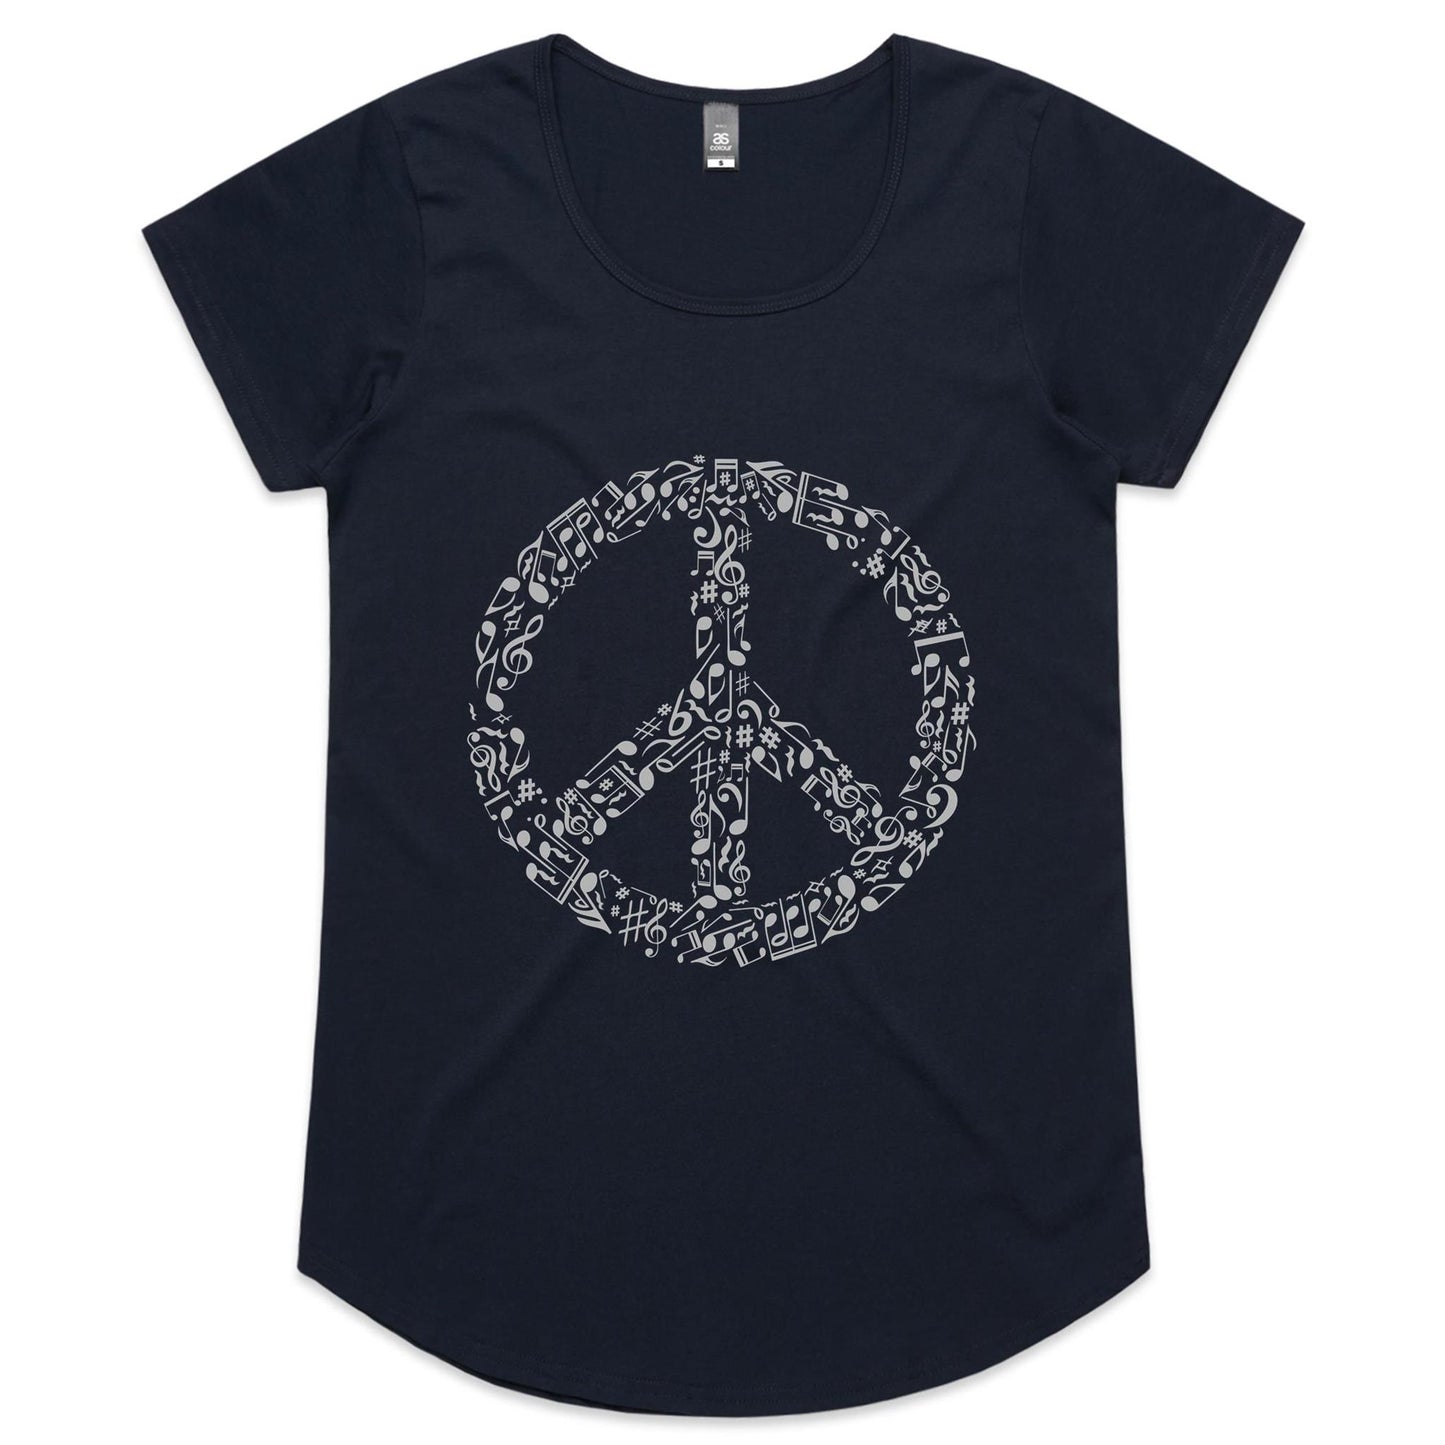 Rhyme in Peace Womens Scoop Neck T-Shirt